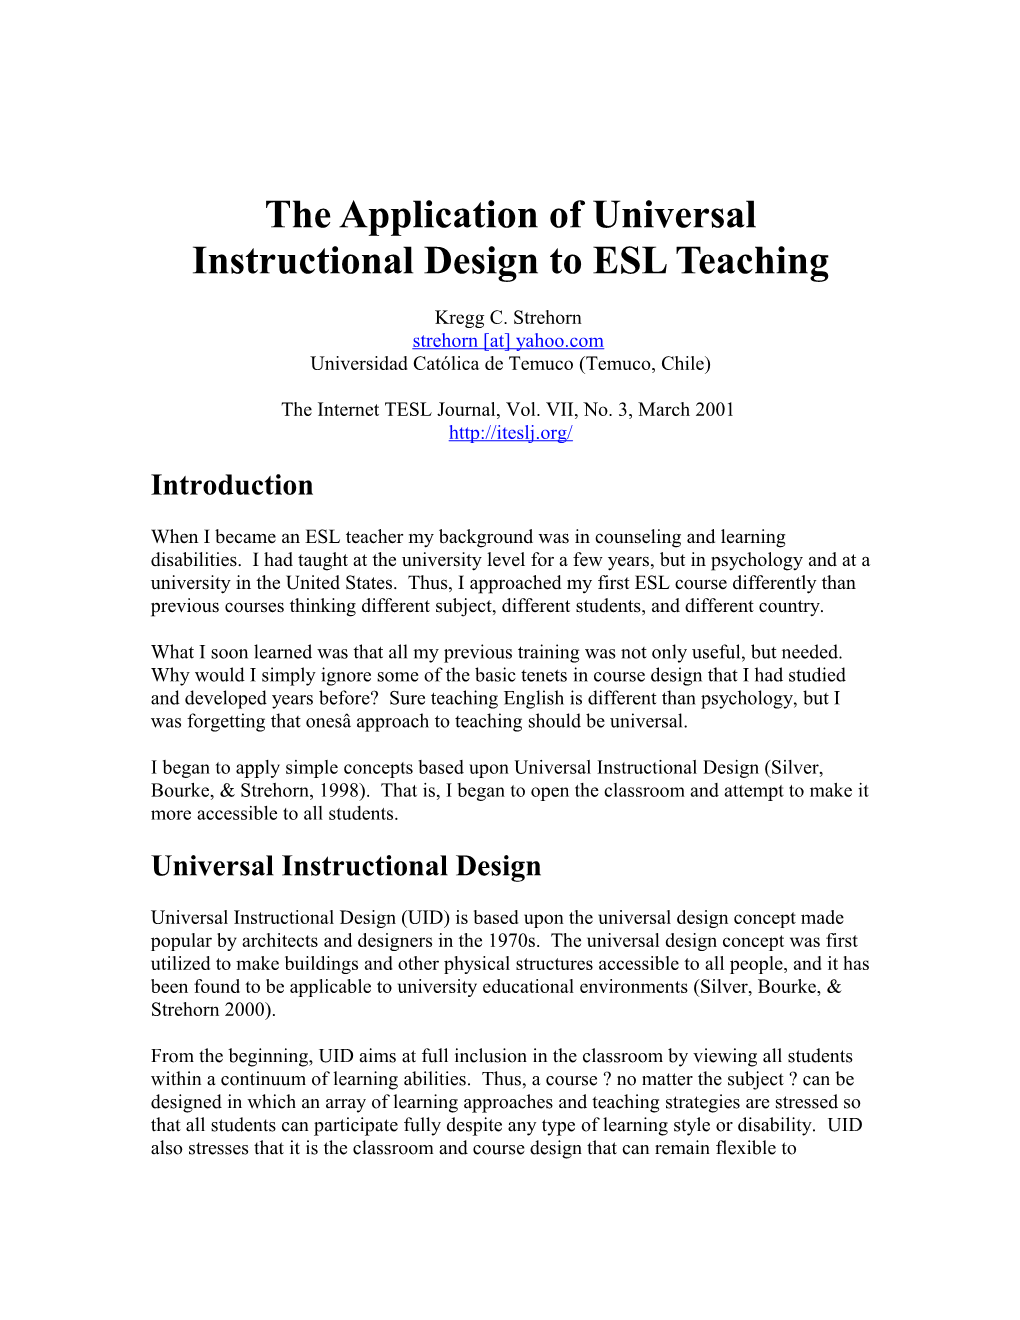 The Application of Universal Instructional Design to ESL Teaching